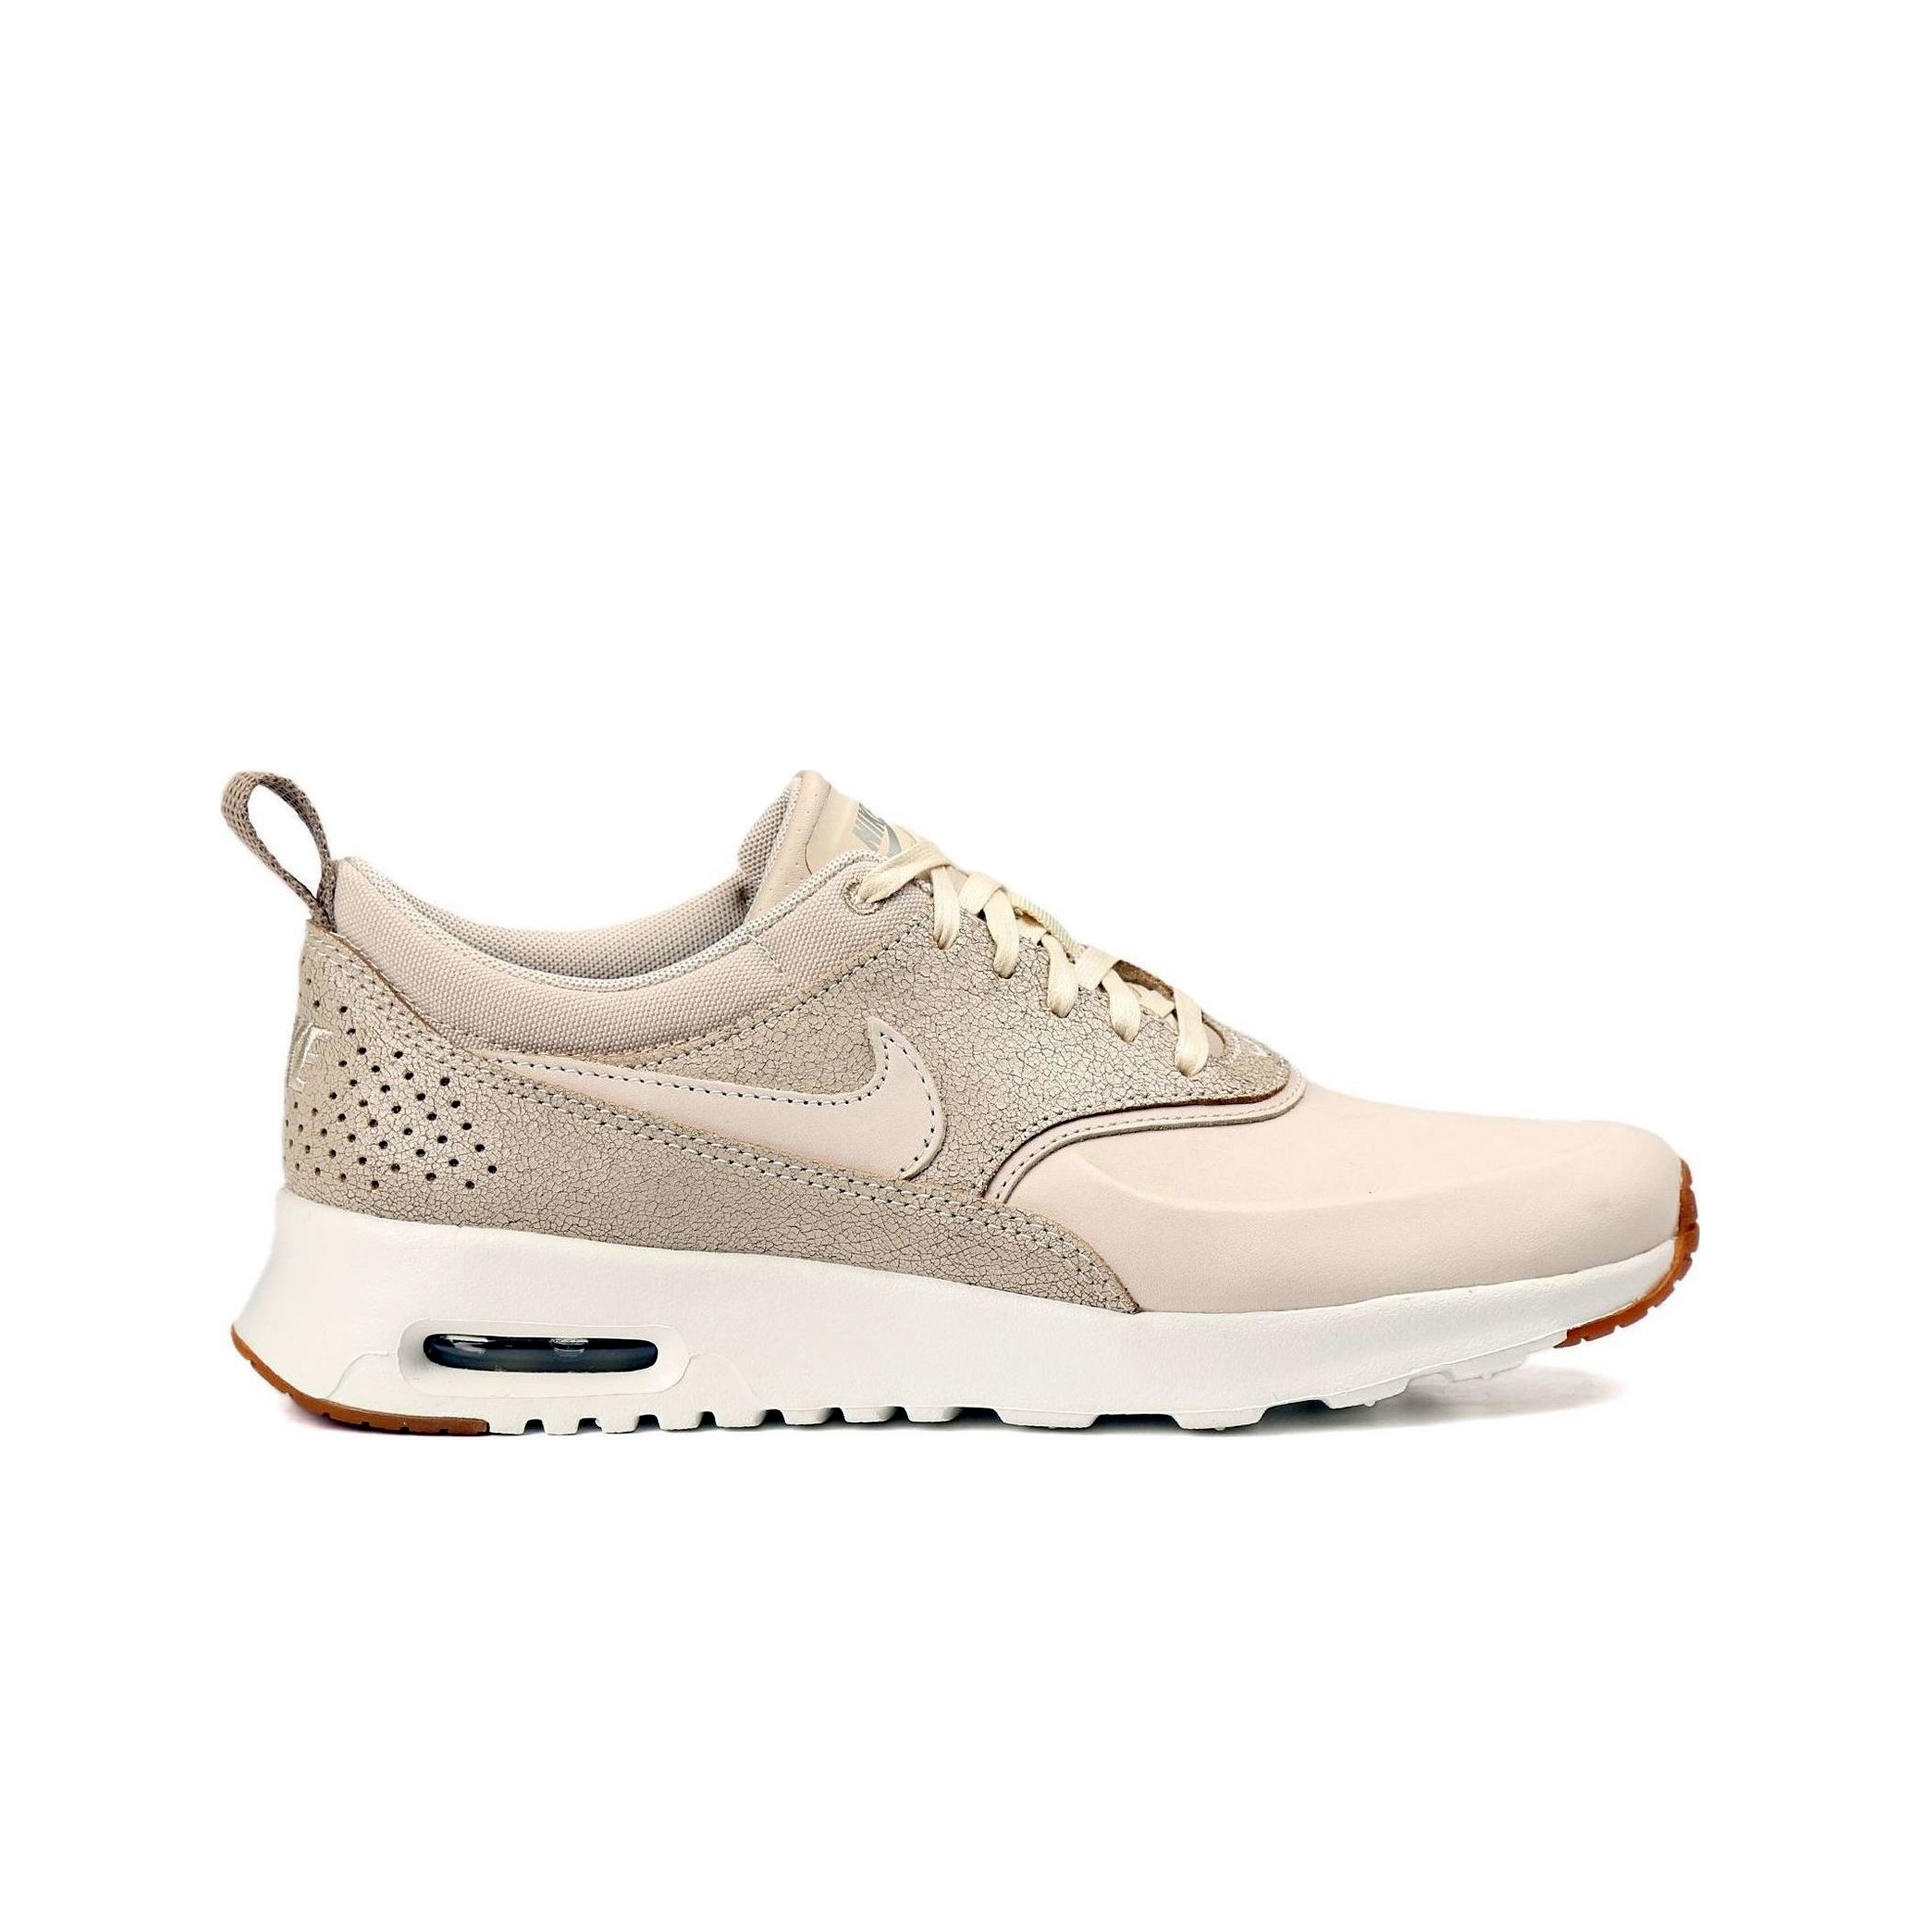 Nike Wmns Air Max Thea Prm beige zapatillas running mujer | Sneakers